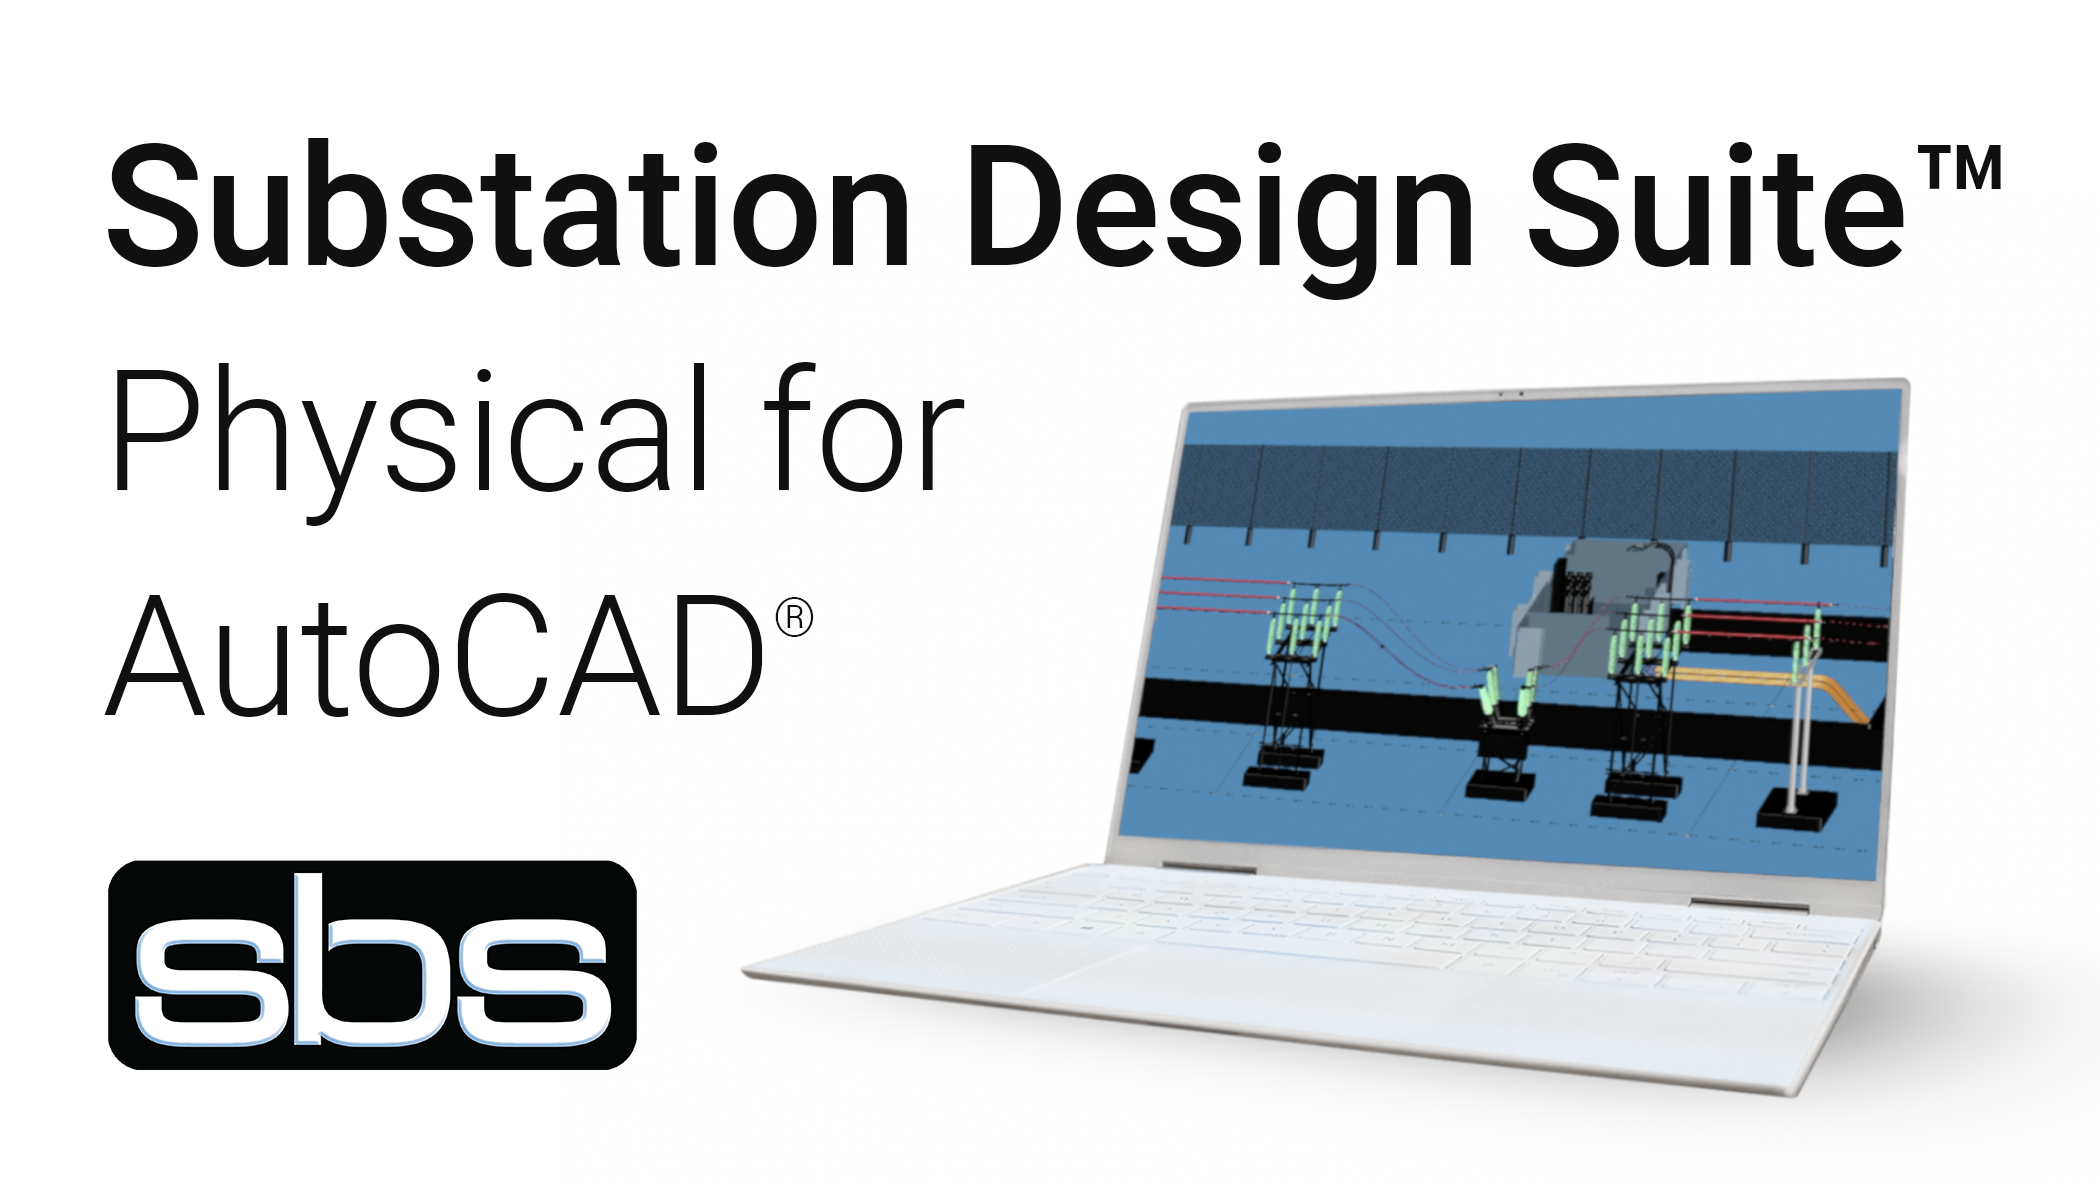 SDS Physical for AutoCAD